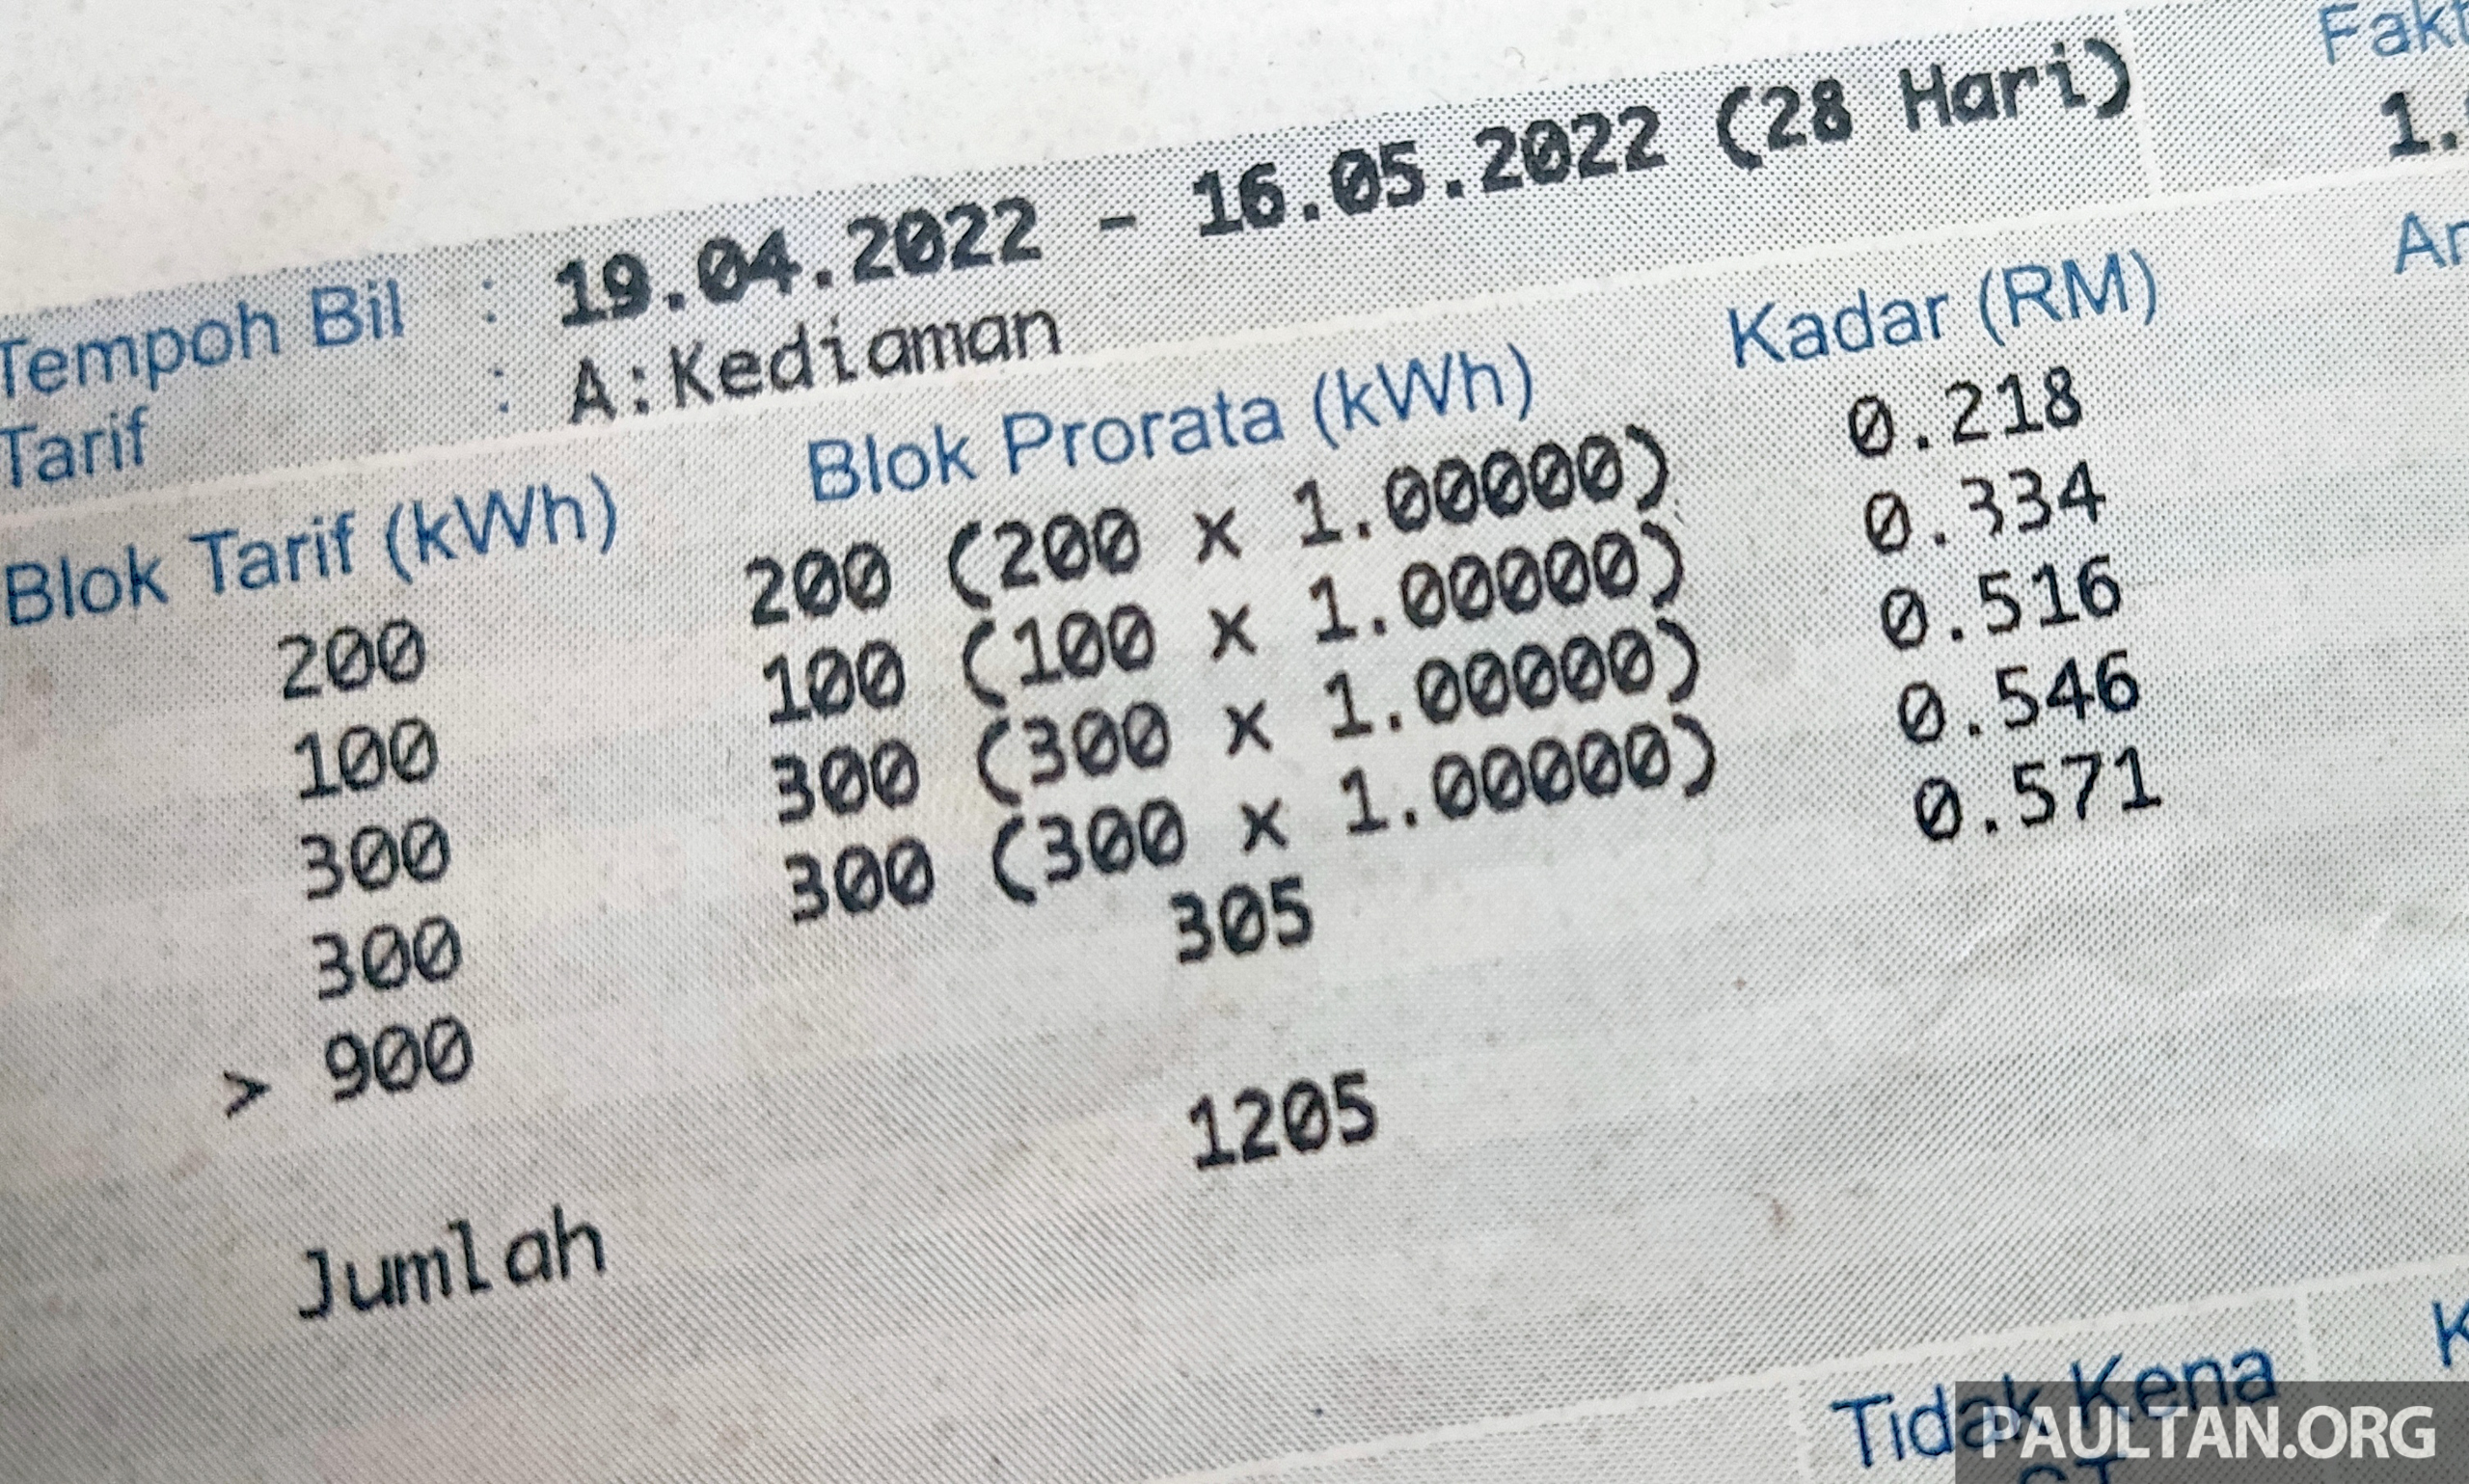 Kwh price of TNB electricity bill